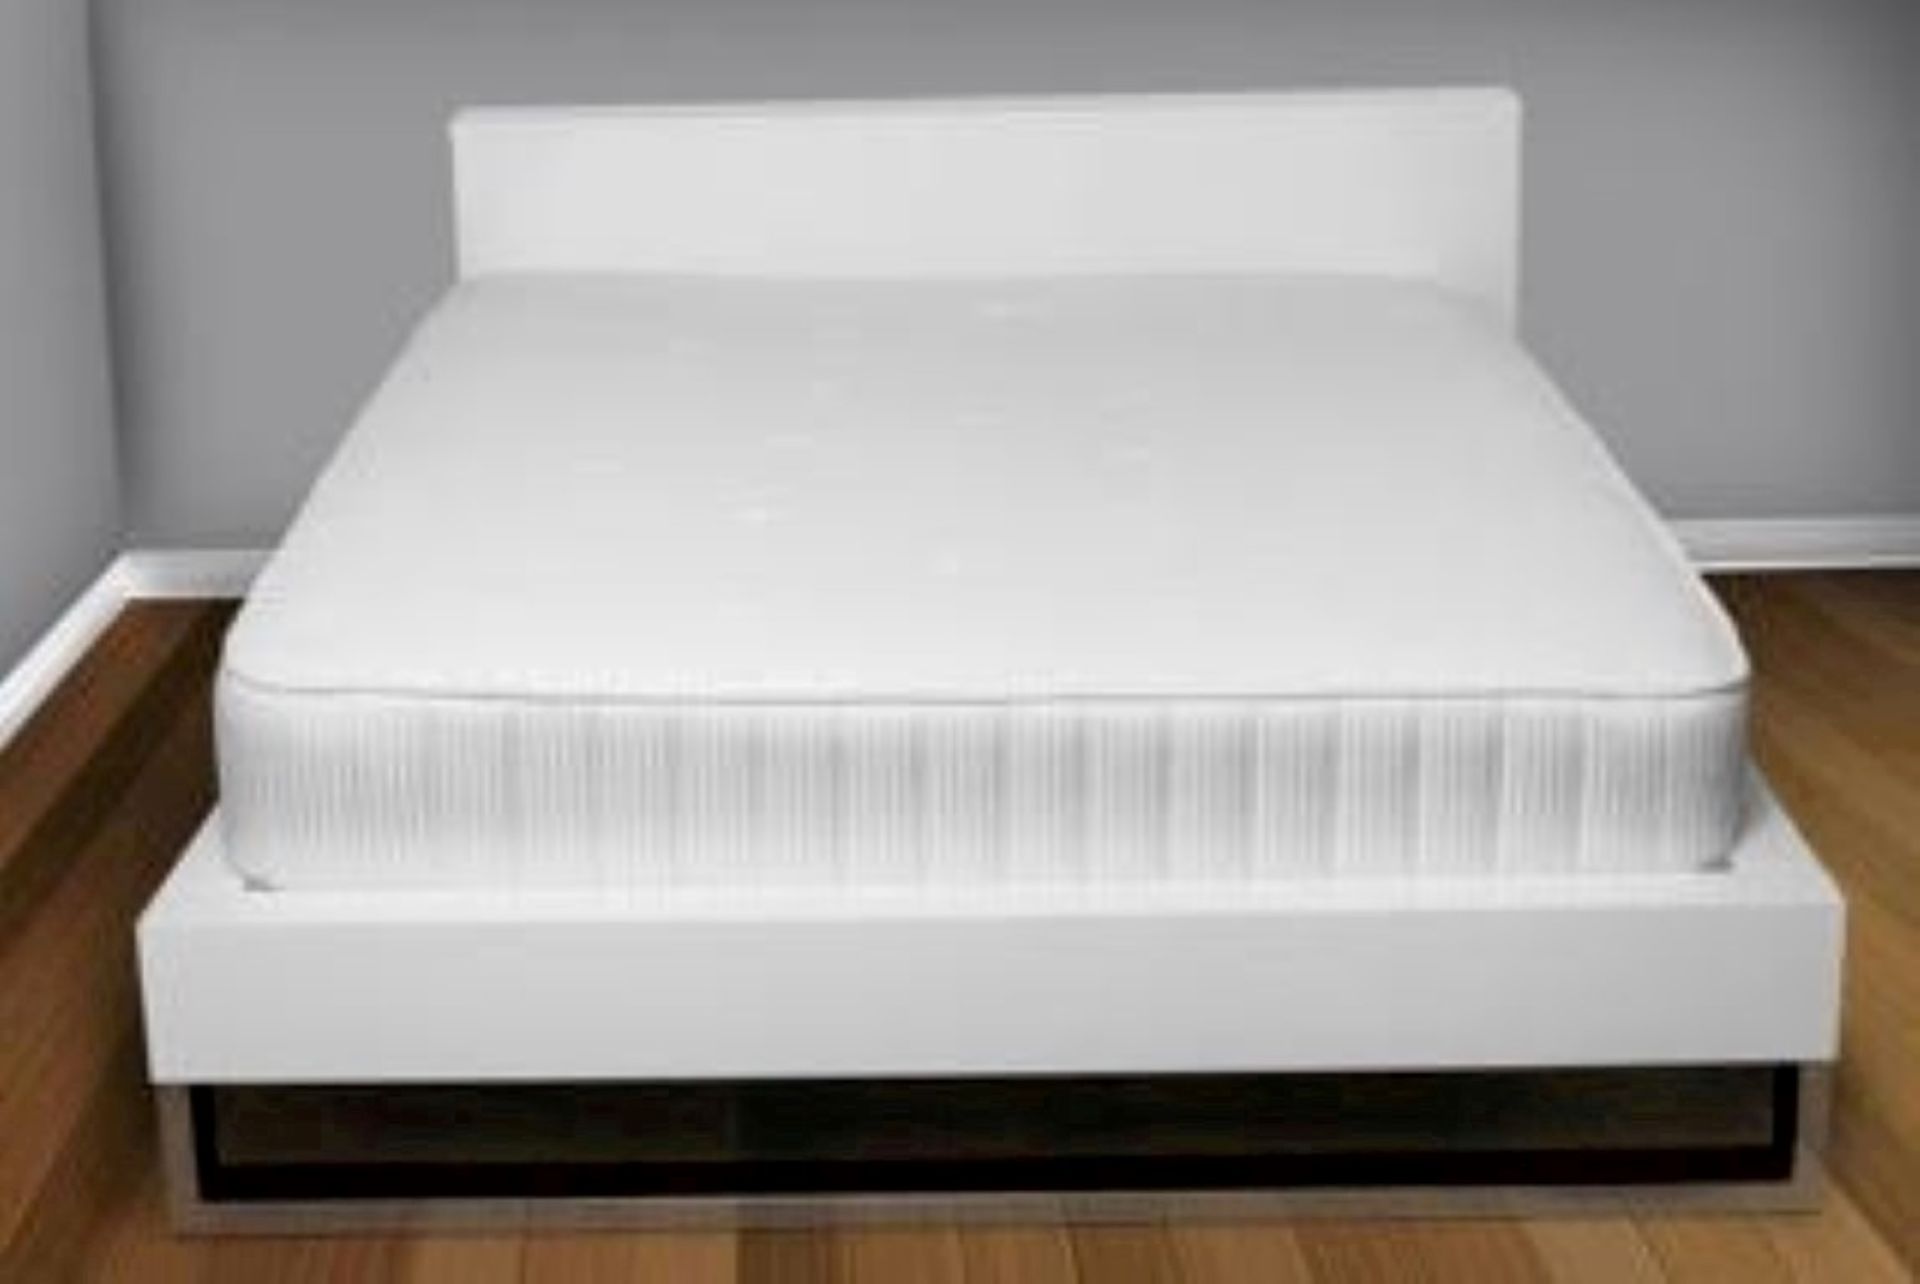 Tenzo Scala Designer 4ft6” Double Bed With Storage Headboard - White Gloss & Chrome - Brand New & - Image 5 of 5